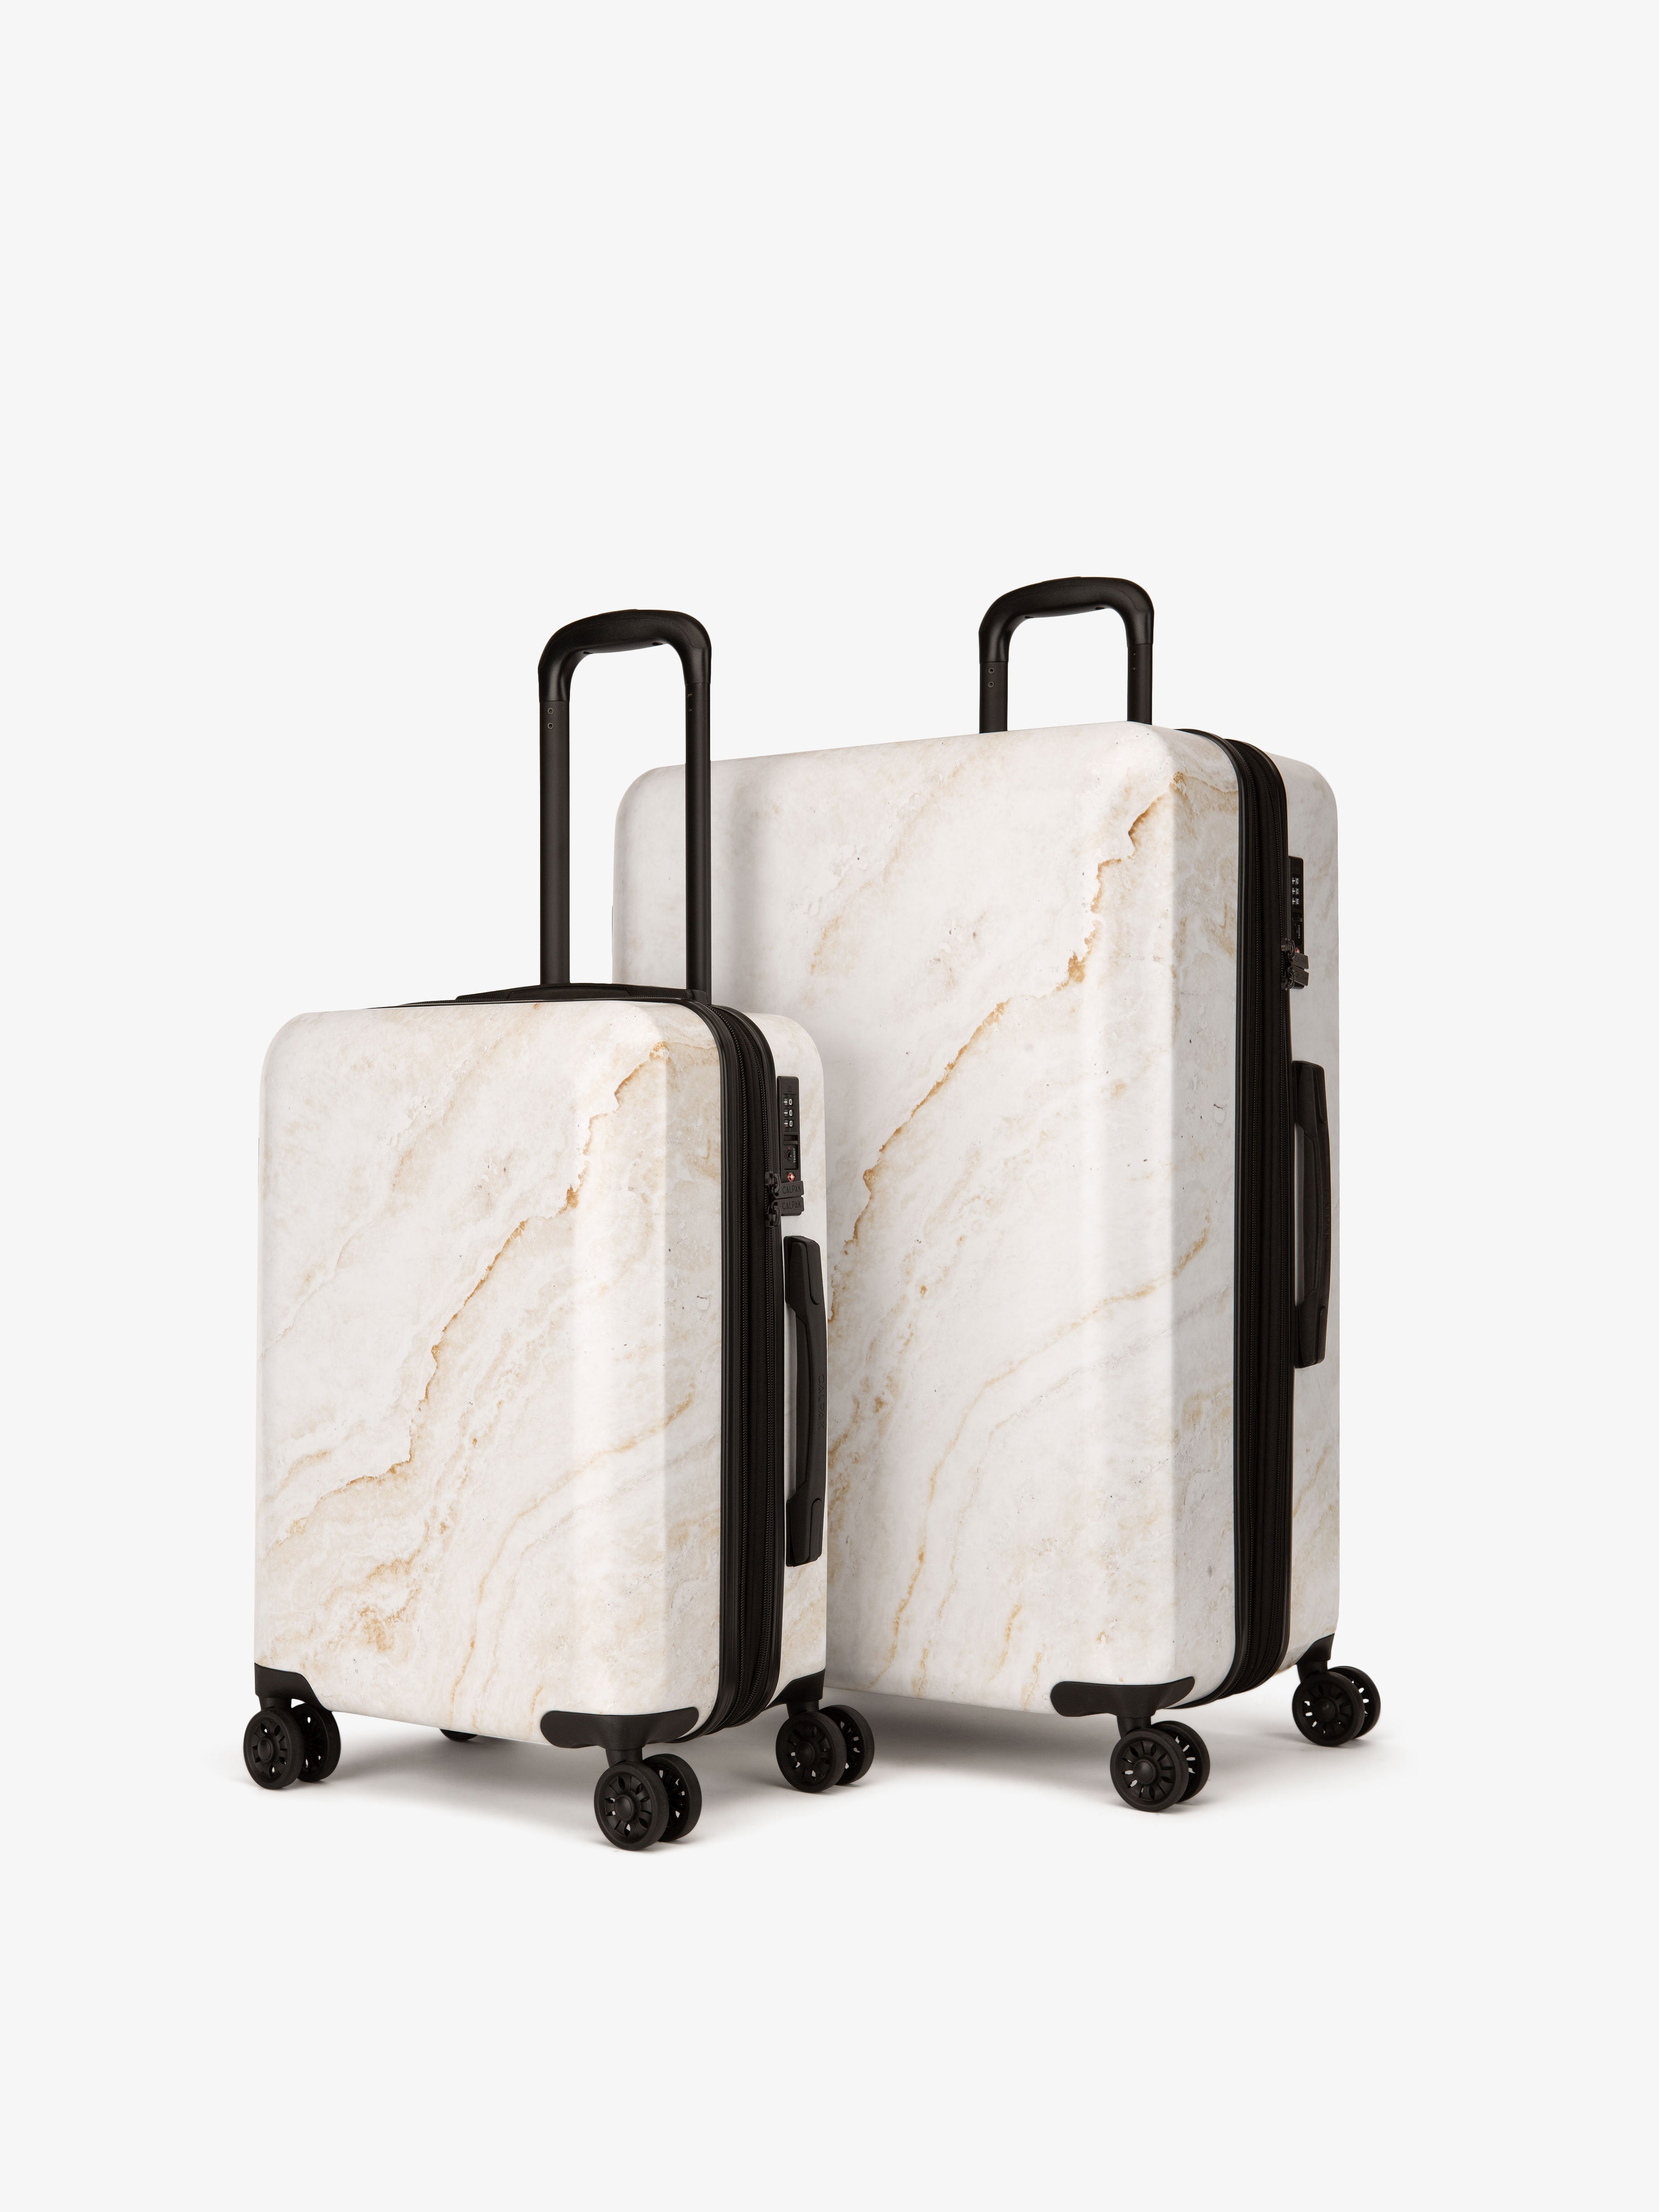 gold marble hard side luggage 2-piece set; LGM2000-GOLD-MARBLE